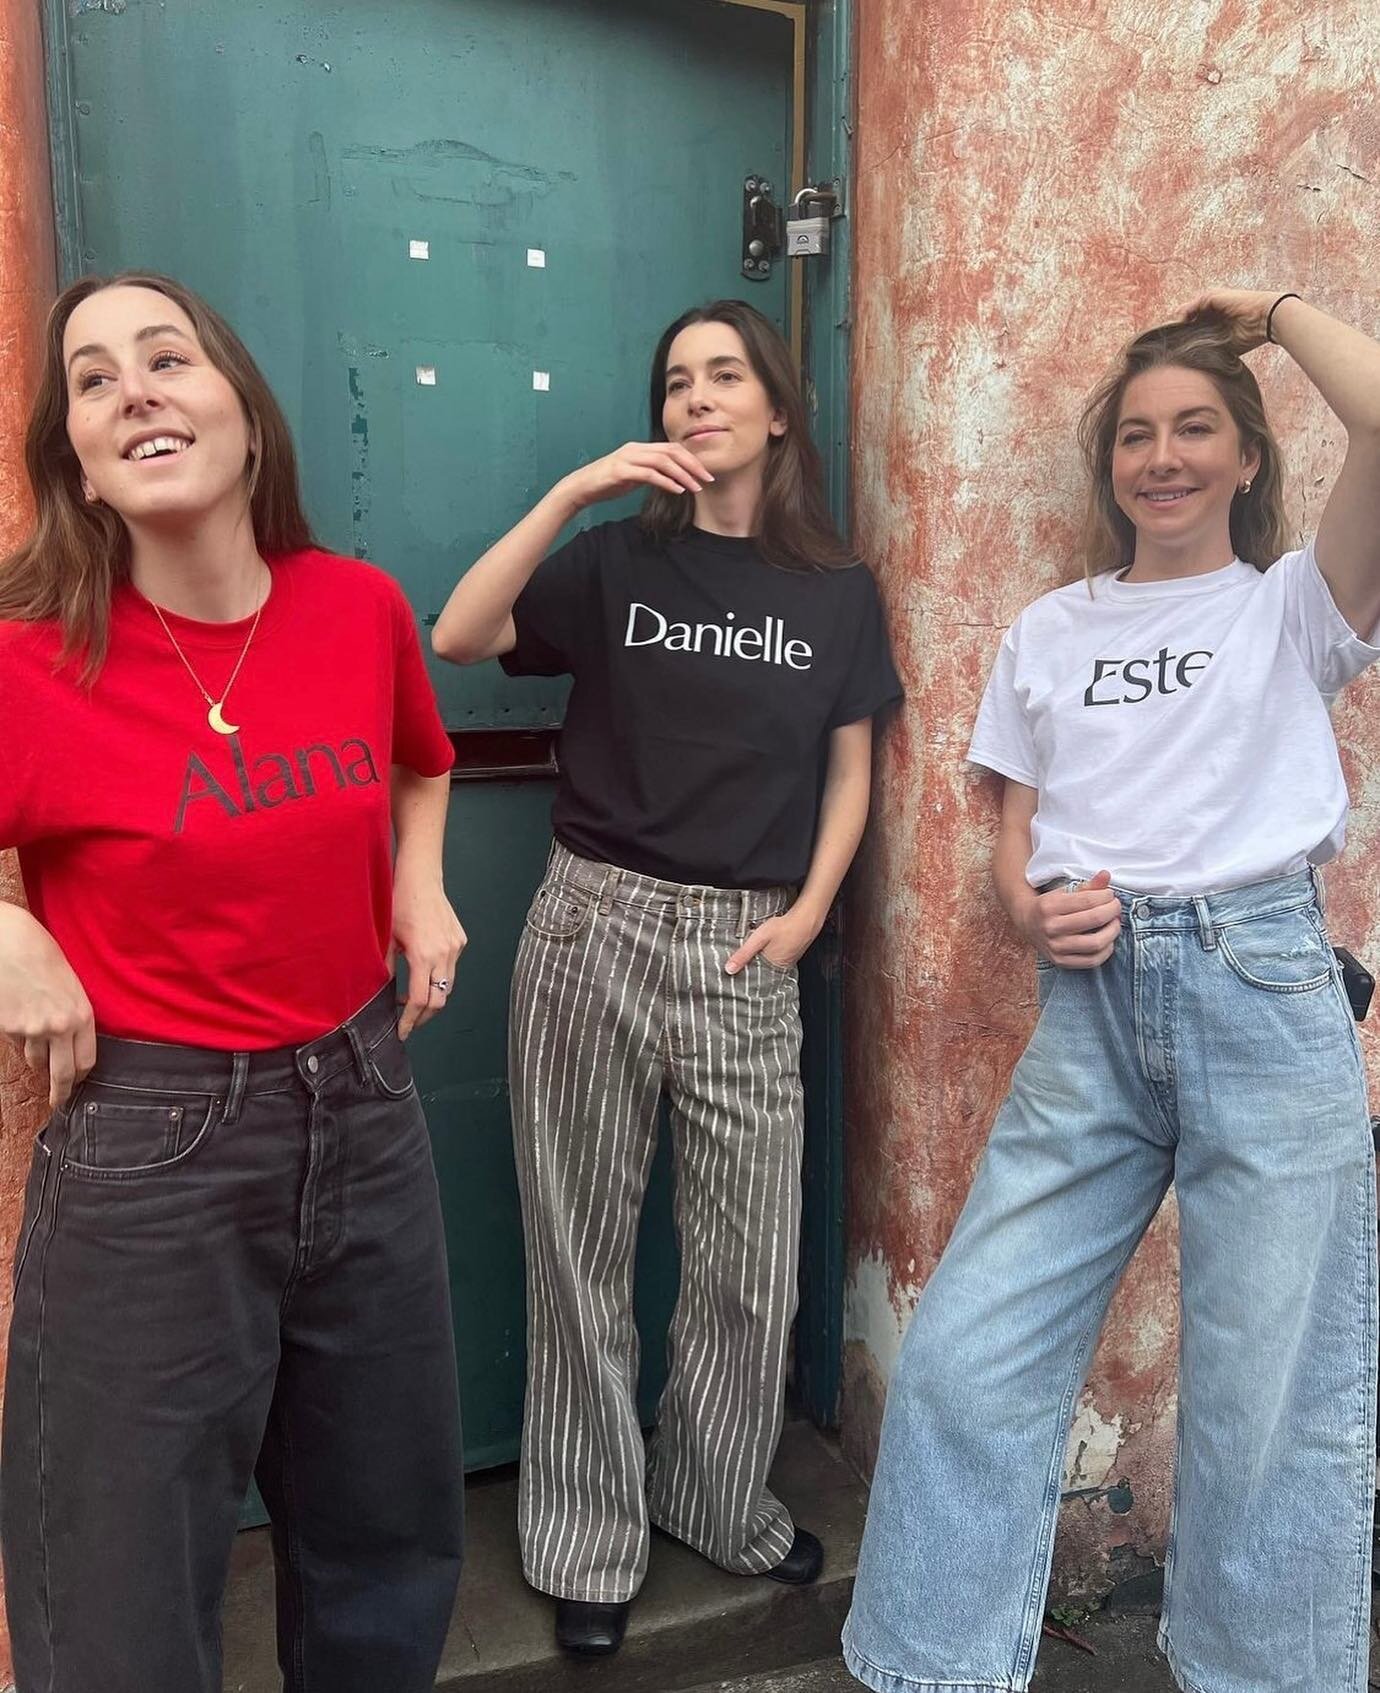 Come on @haimtheband fans hands up 🙌 if you need these tees in your life 

#haimtheband #haim #music #bands #girlband #family #jewish #judaism #humansofjudaism #mazeltov #15years #anniversary #israel #jewishandproud #musicindustry #musicinspiration 